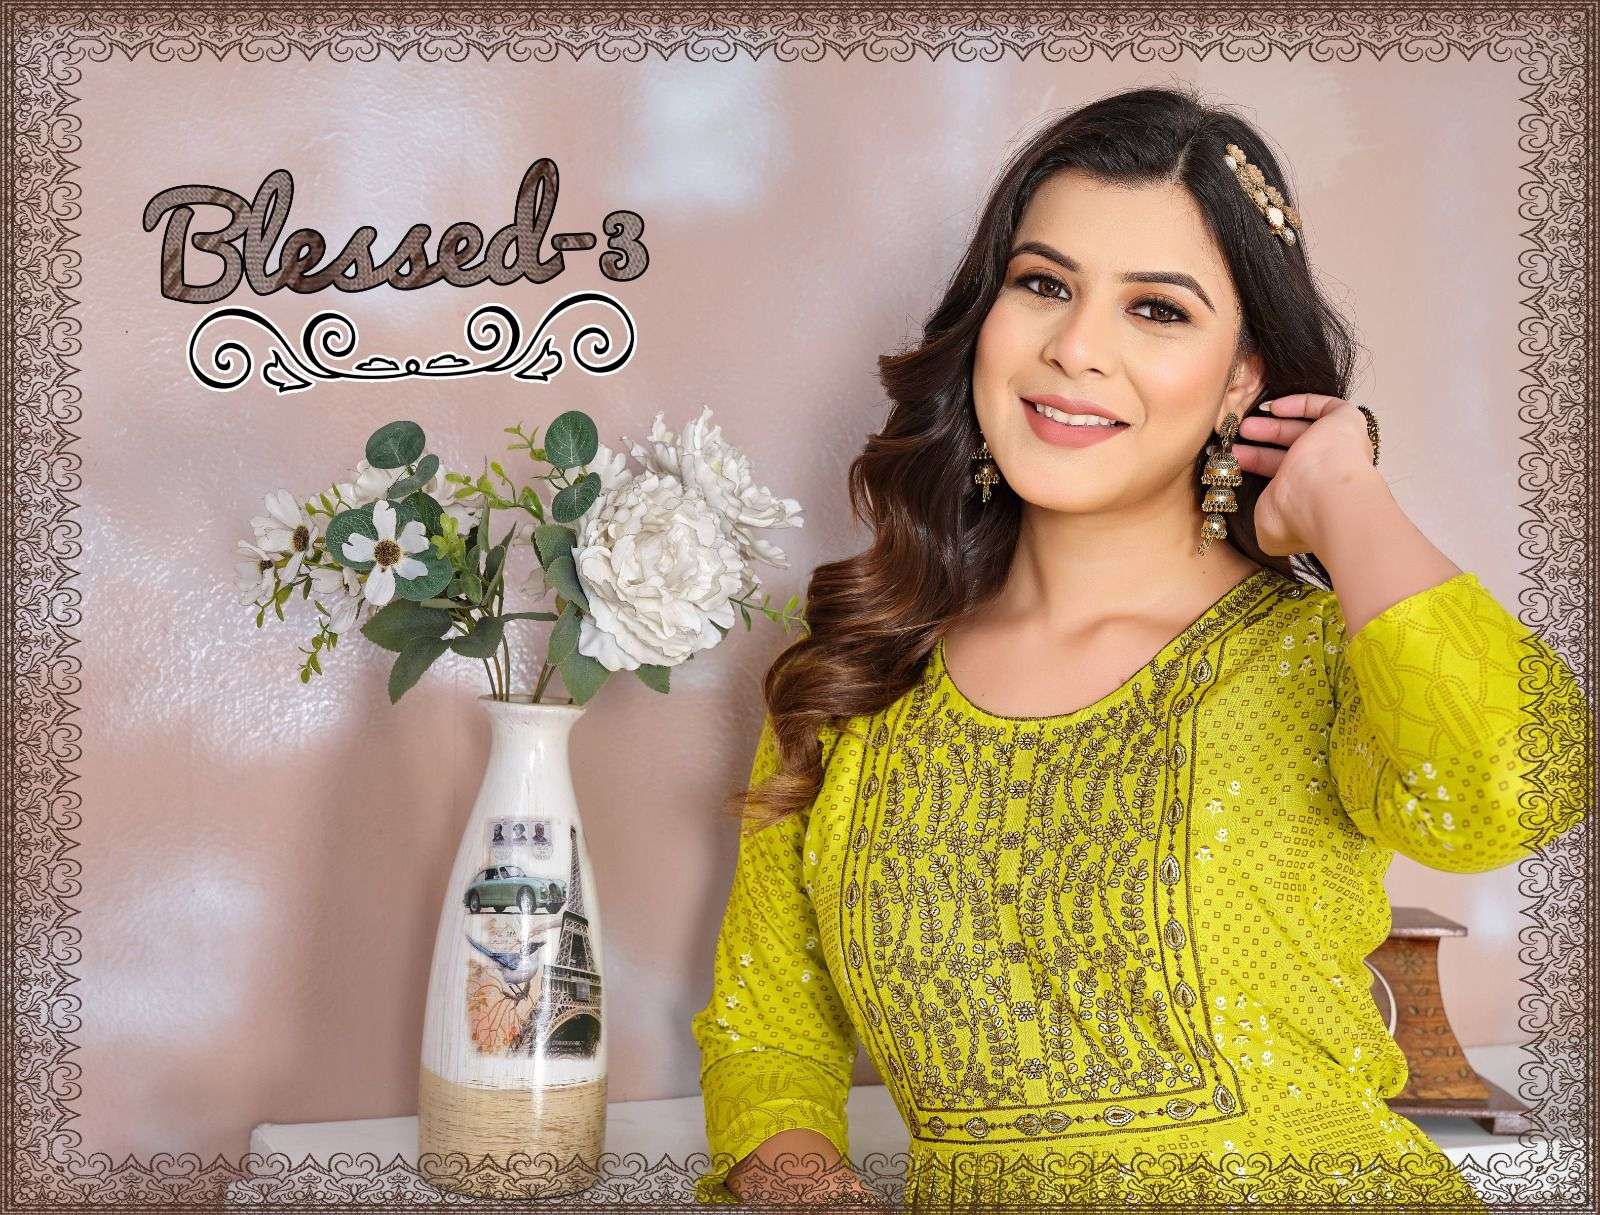  BEAUTY QUEEN BLESSED-3 RAYON LONG FLAIR KURTI CATRALOG WHOLESALER BEST RATE 